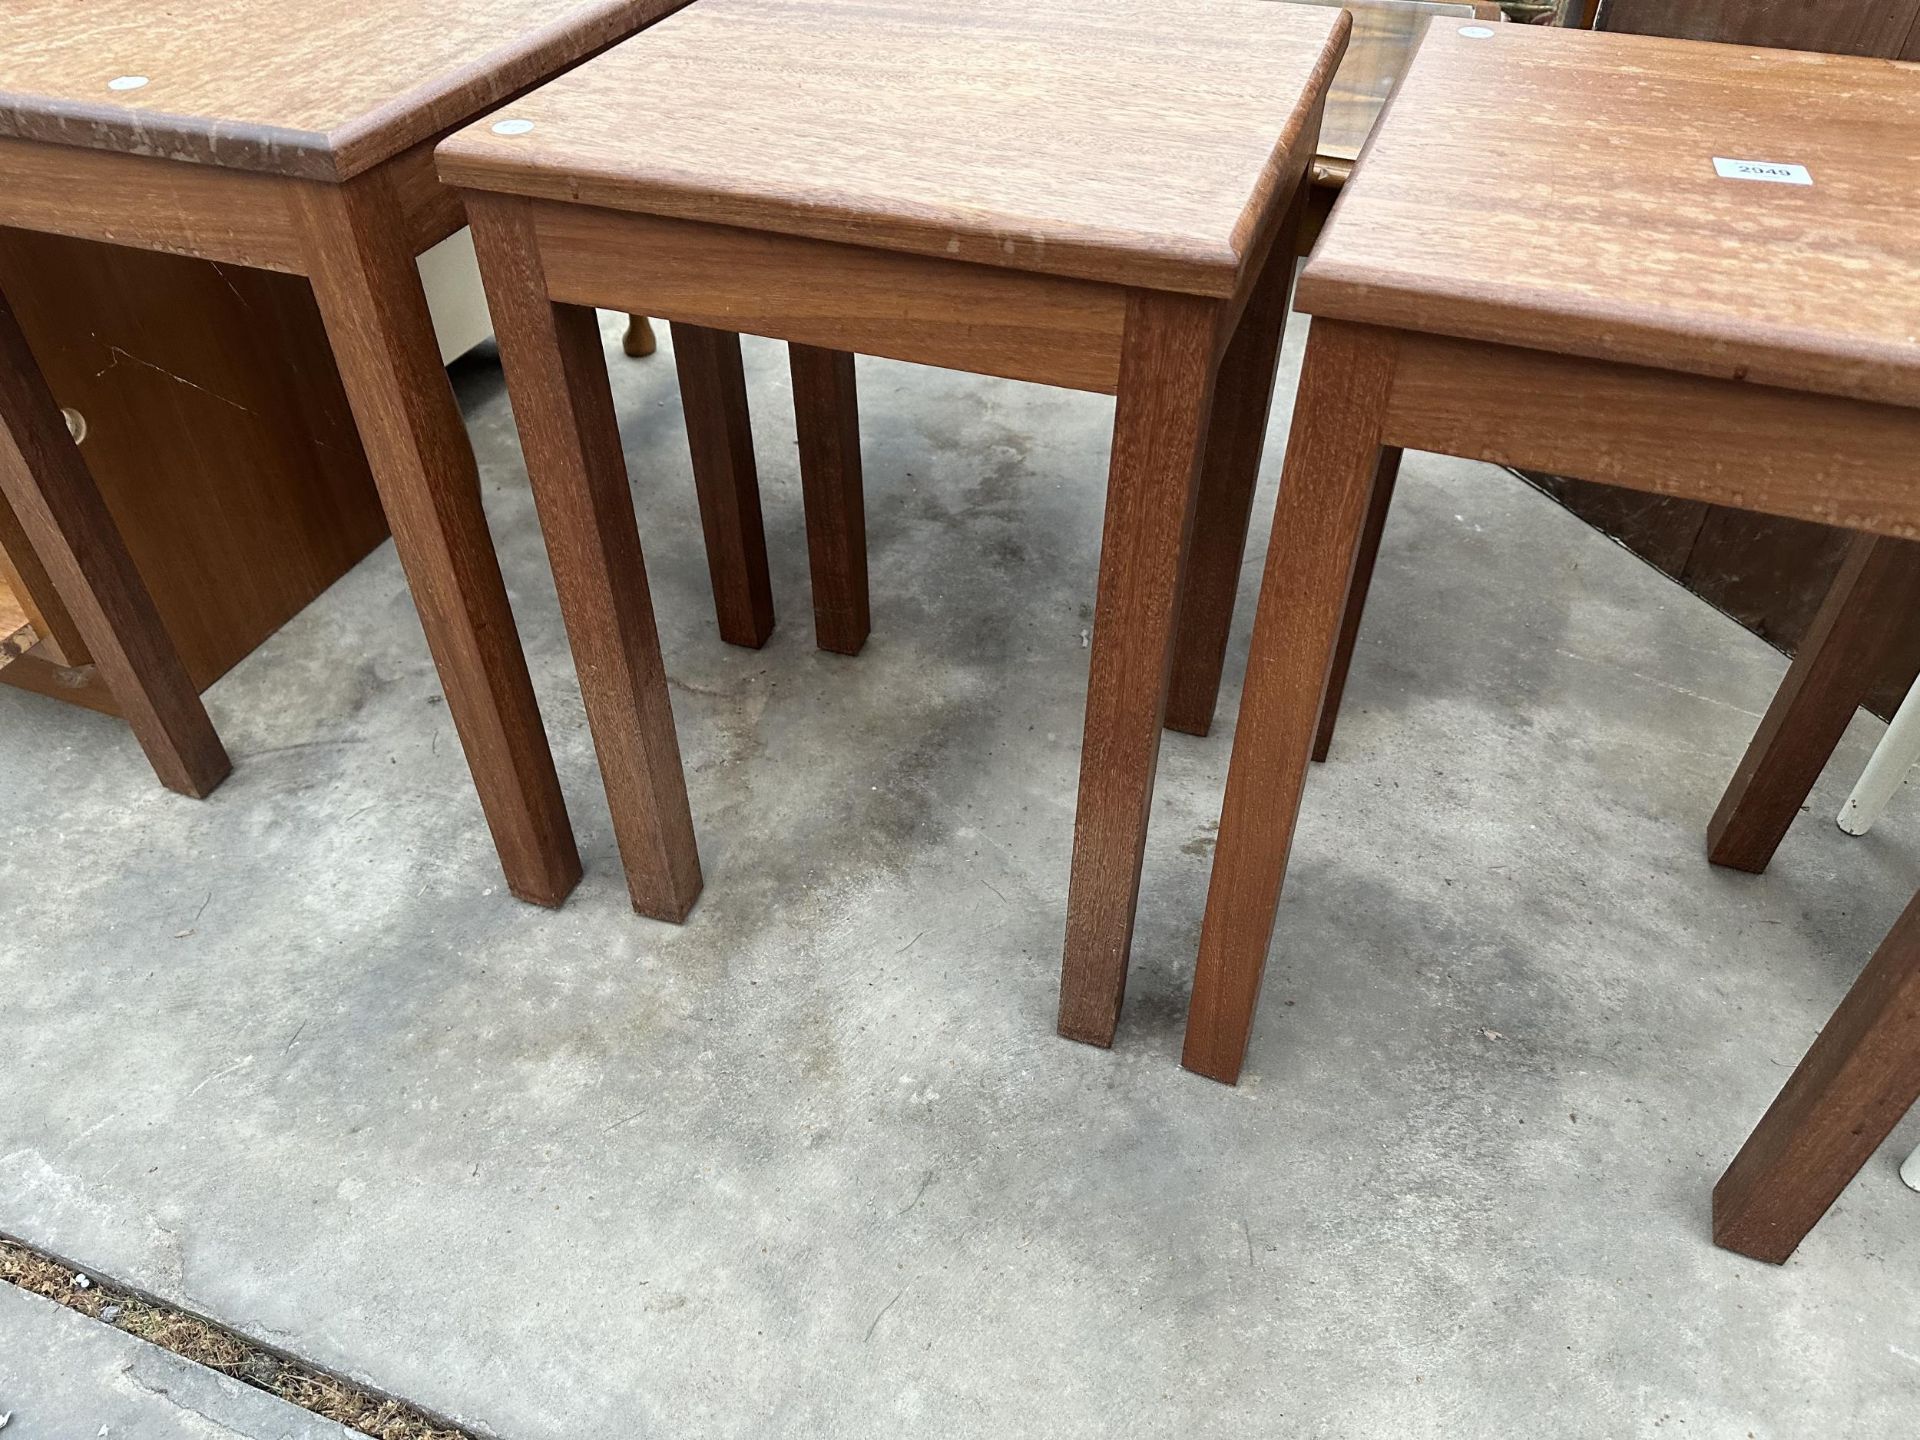 THREE MODERN HARDWOOD LAMP TABLES, 15" SQUARE EACH - Image 3 of 3